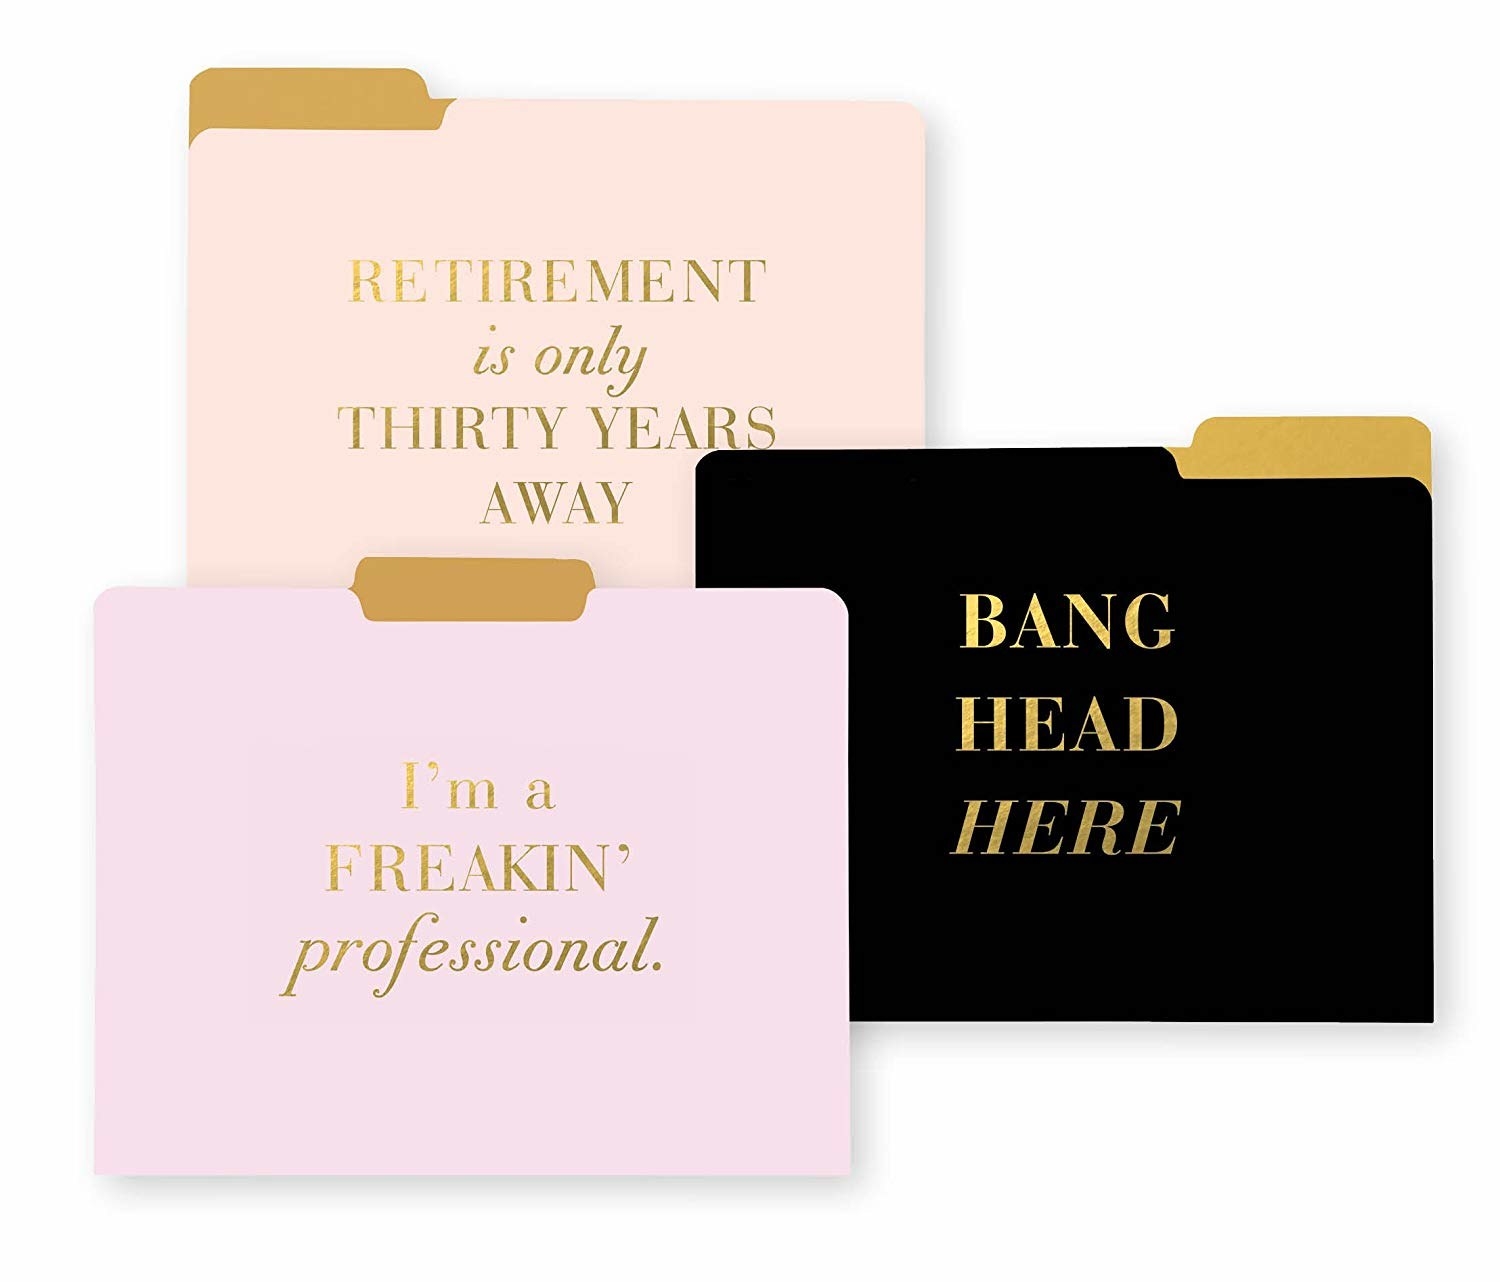 The set of folders that read, &quot;Retirement is only thirty years away,&quot; &quot;I&#x27;m a freakin&#x27; professional,&quot; and &quot;Bang head here&quot;